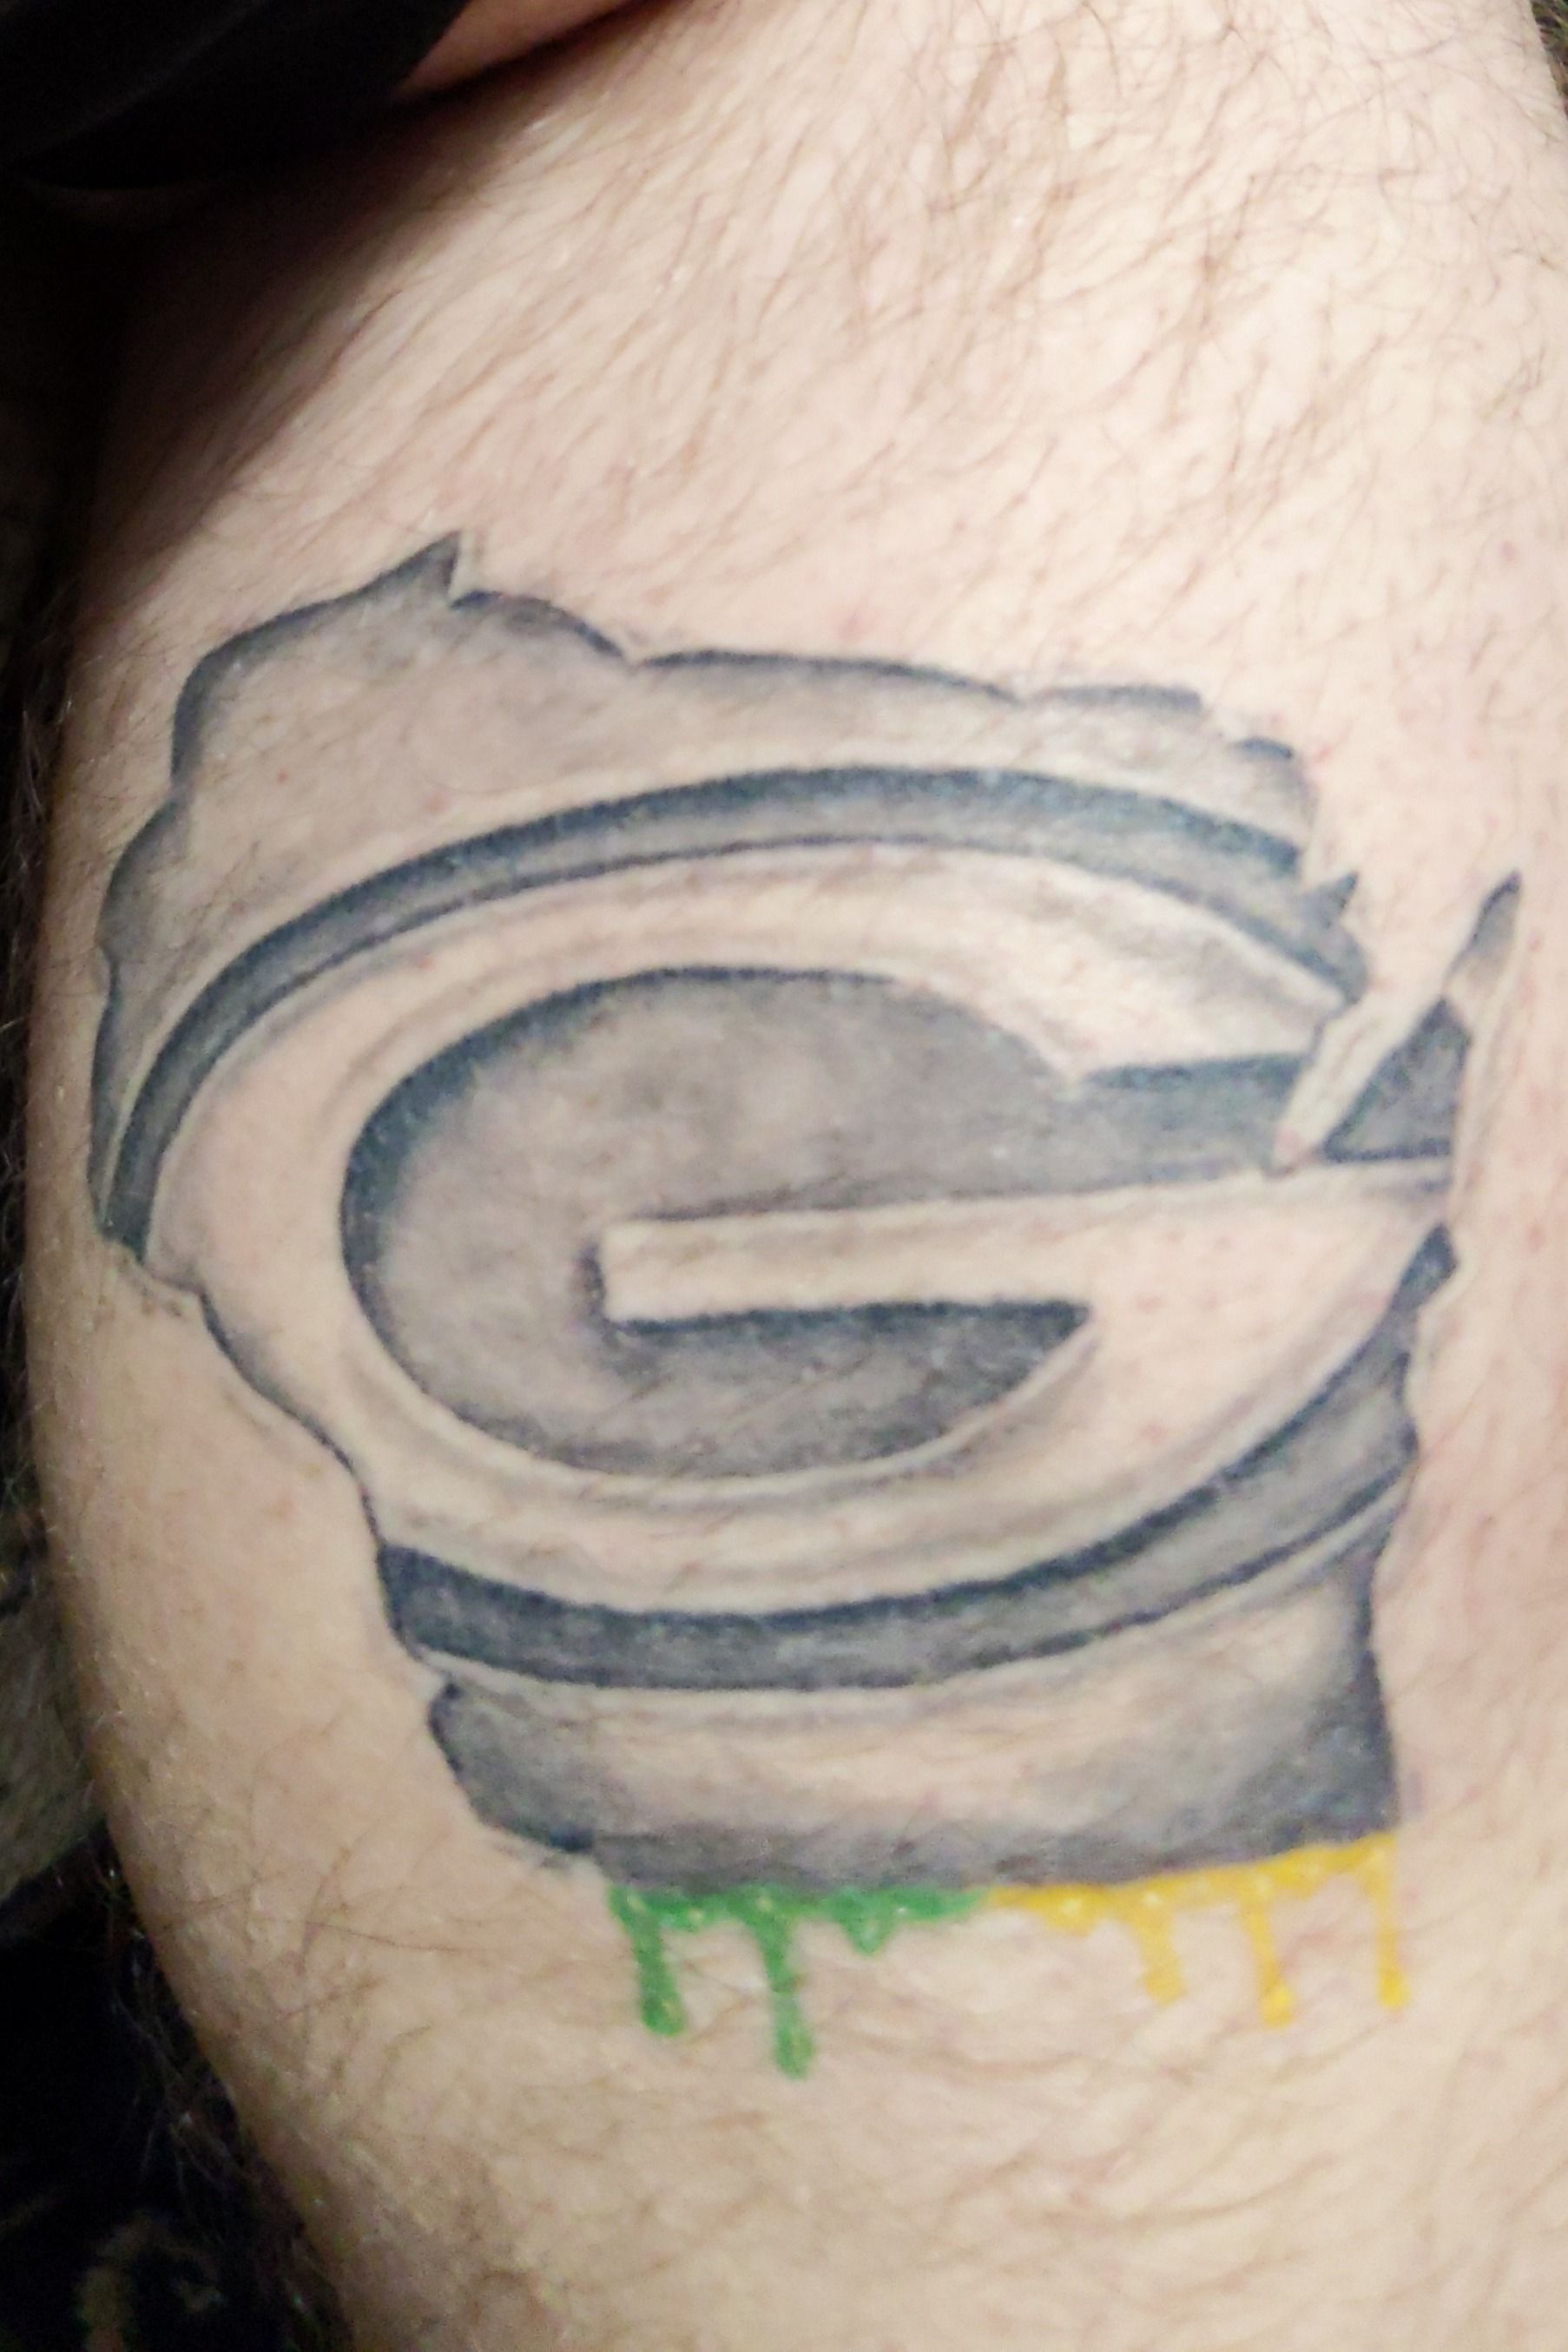 Man gets tattoo after meeting Packers QB Aaron Rodgers in Hawaii getting  his autograph